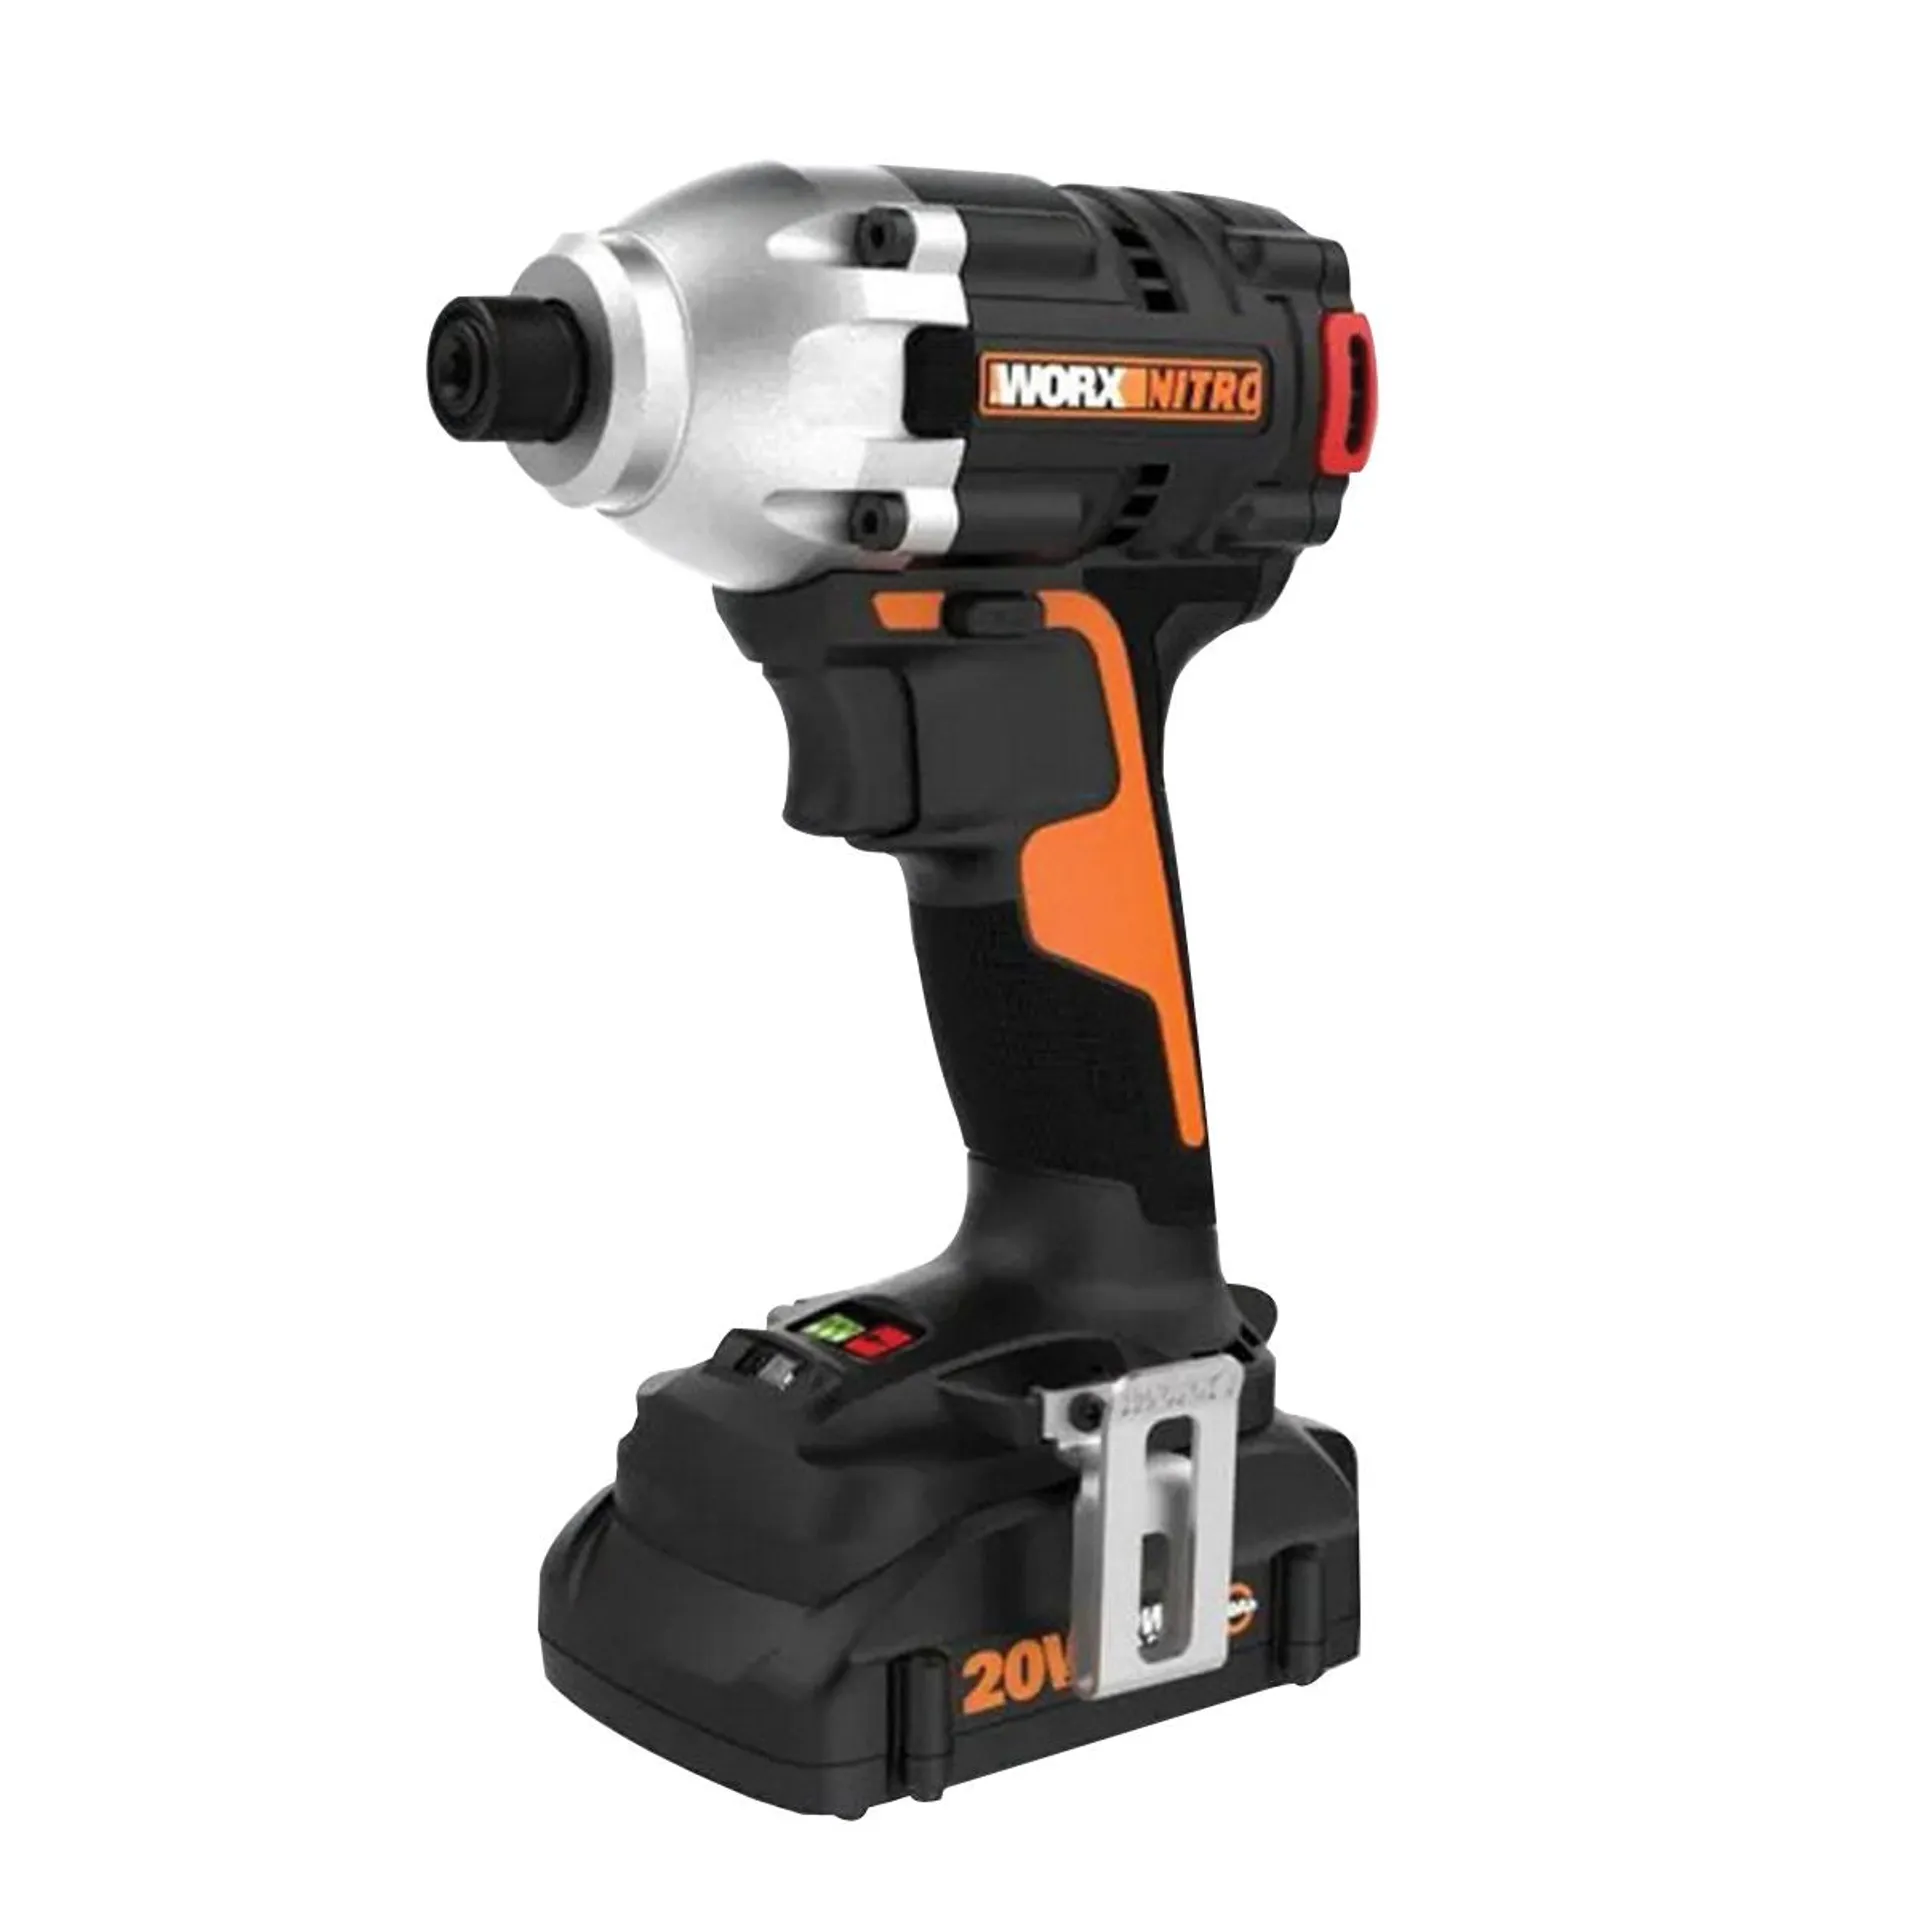 WORX WX261L Cordless Impact Driver with Brushless Motor, Battery Included, 20 V, 2 Ah, 1/4 in Drive, 4000 bpm IPM